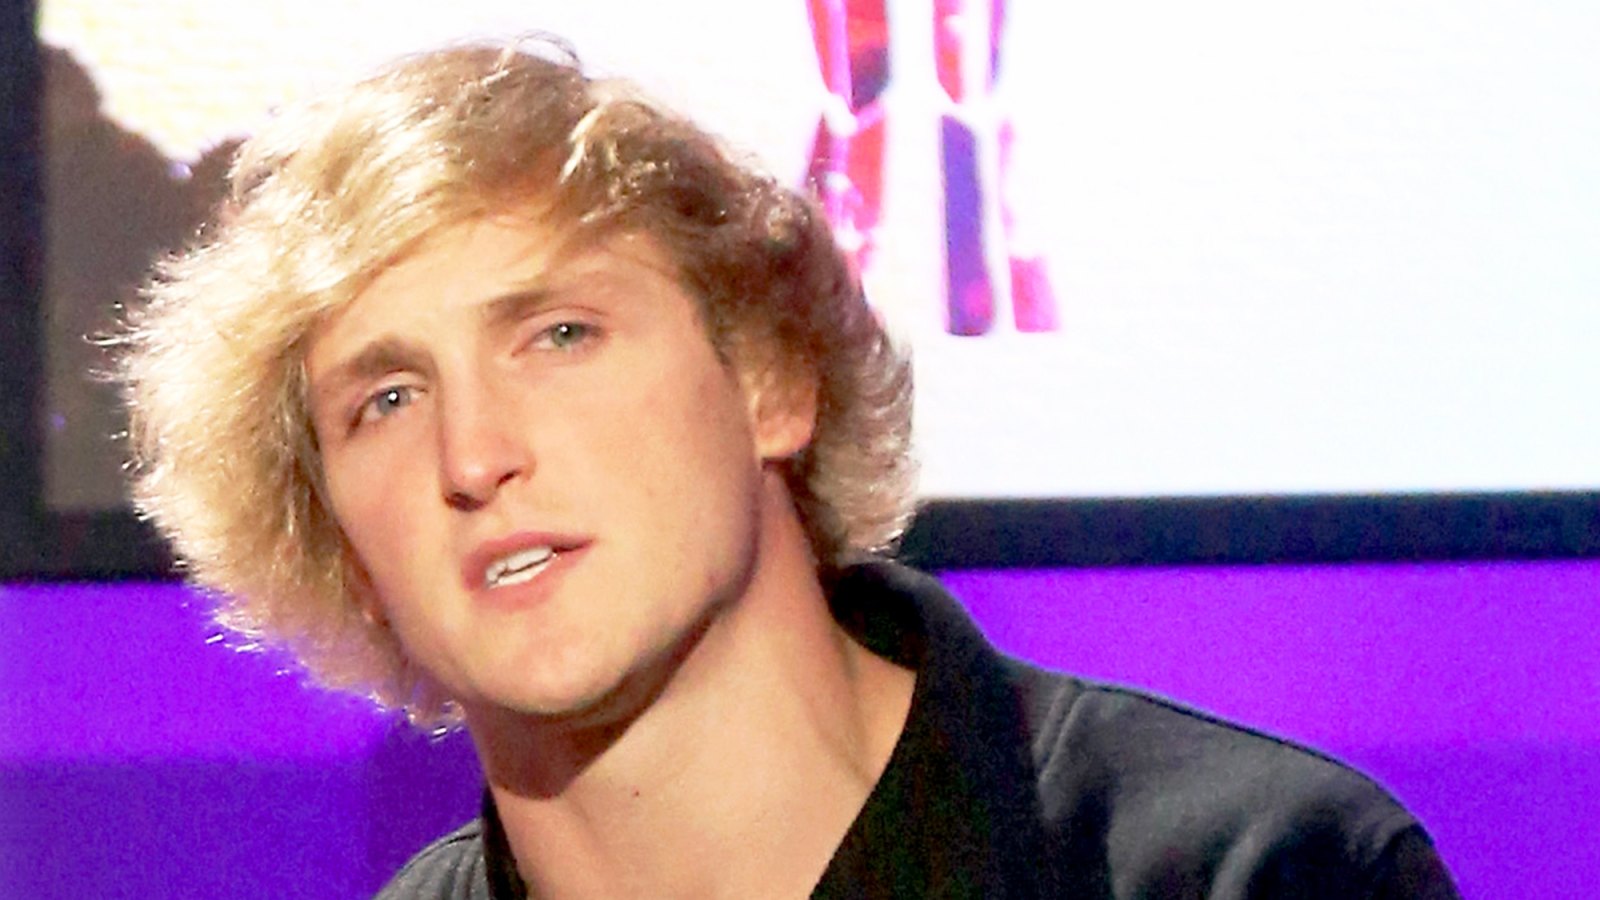 Logan Paul onstage during the 6th annual Streamy Awards at The Beverly Hilton Hotel on in Beverly Hills, California.